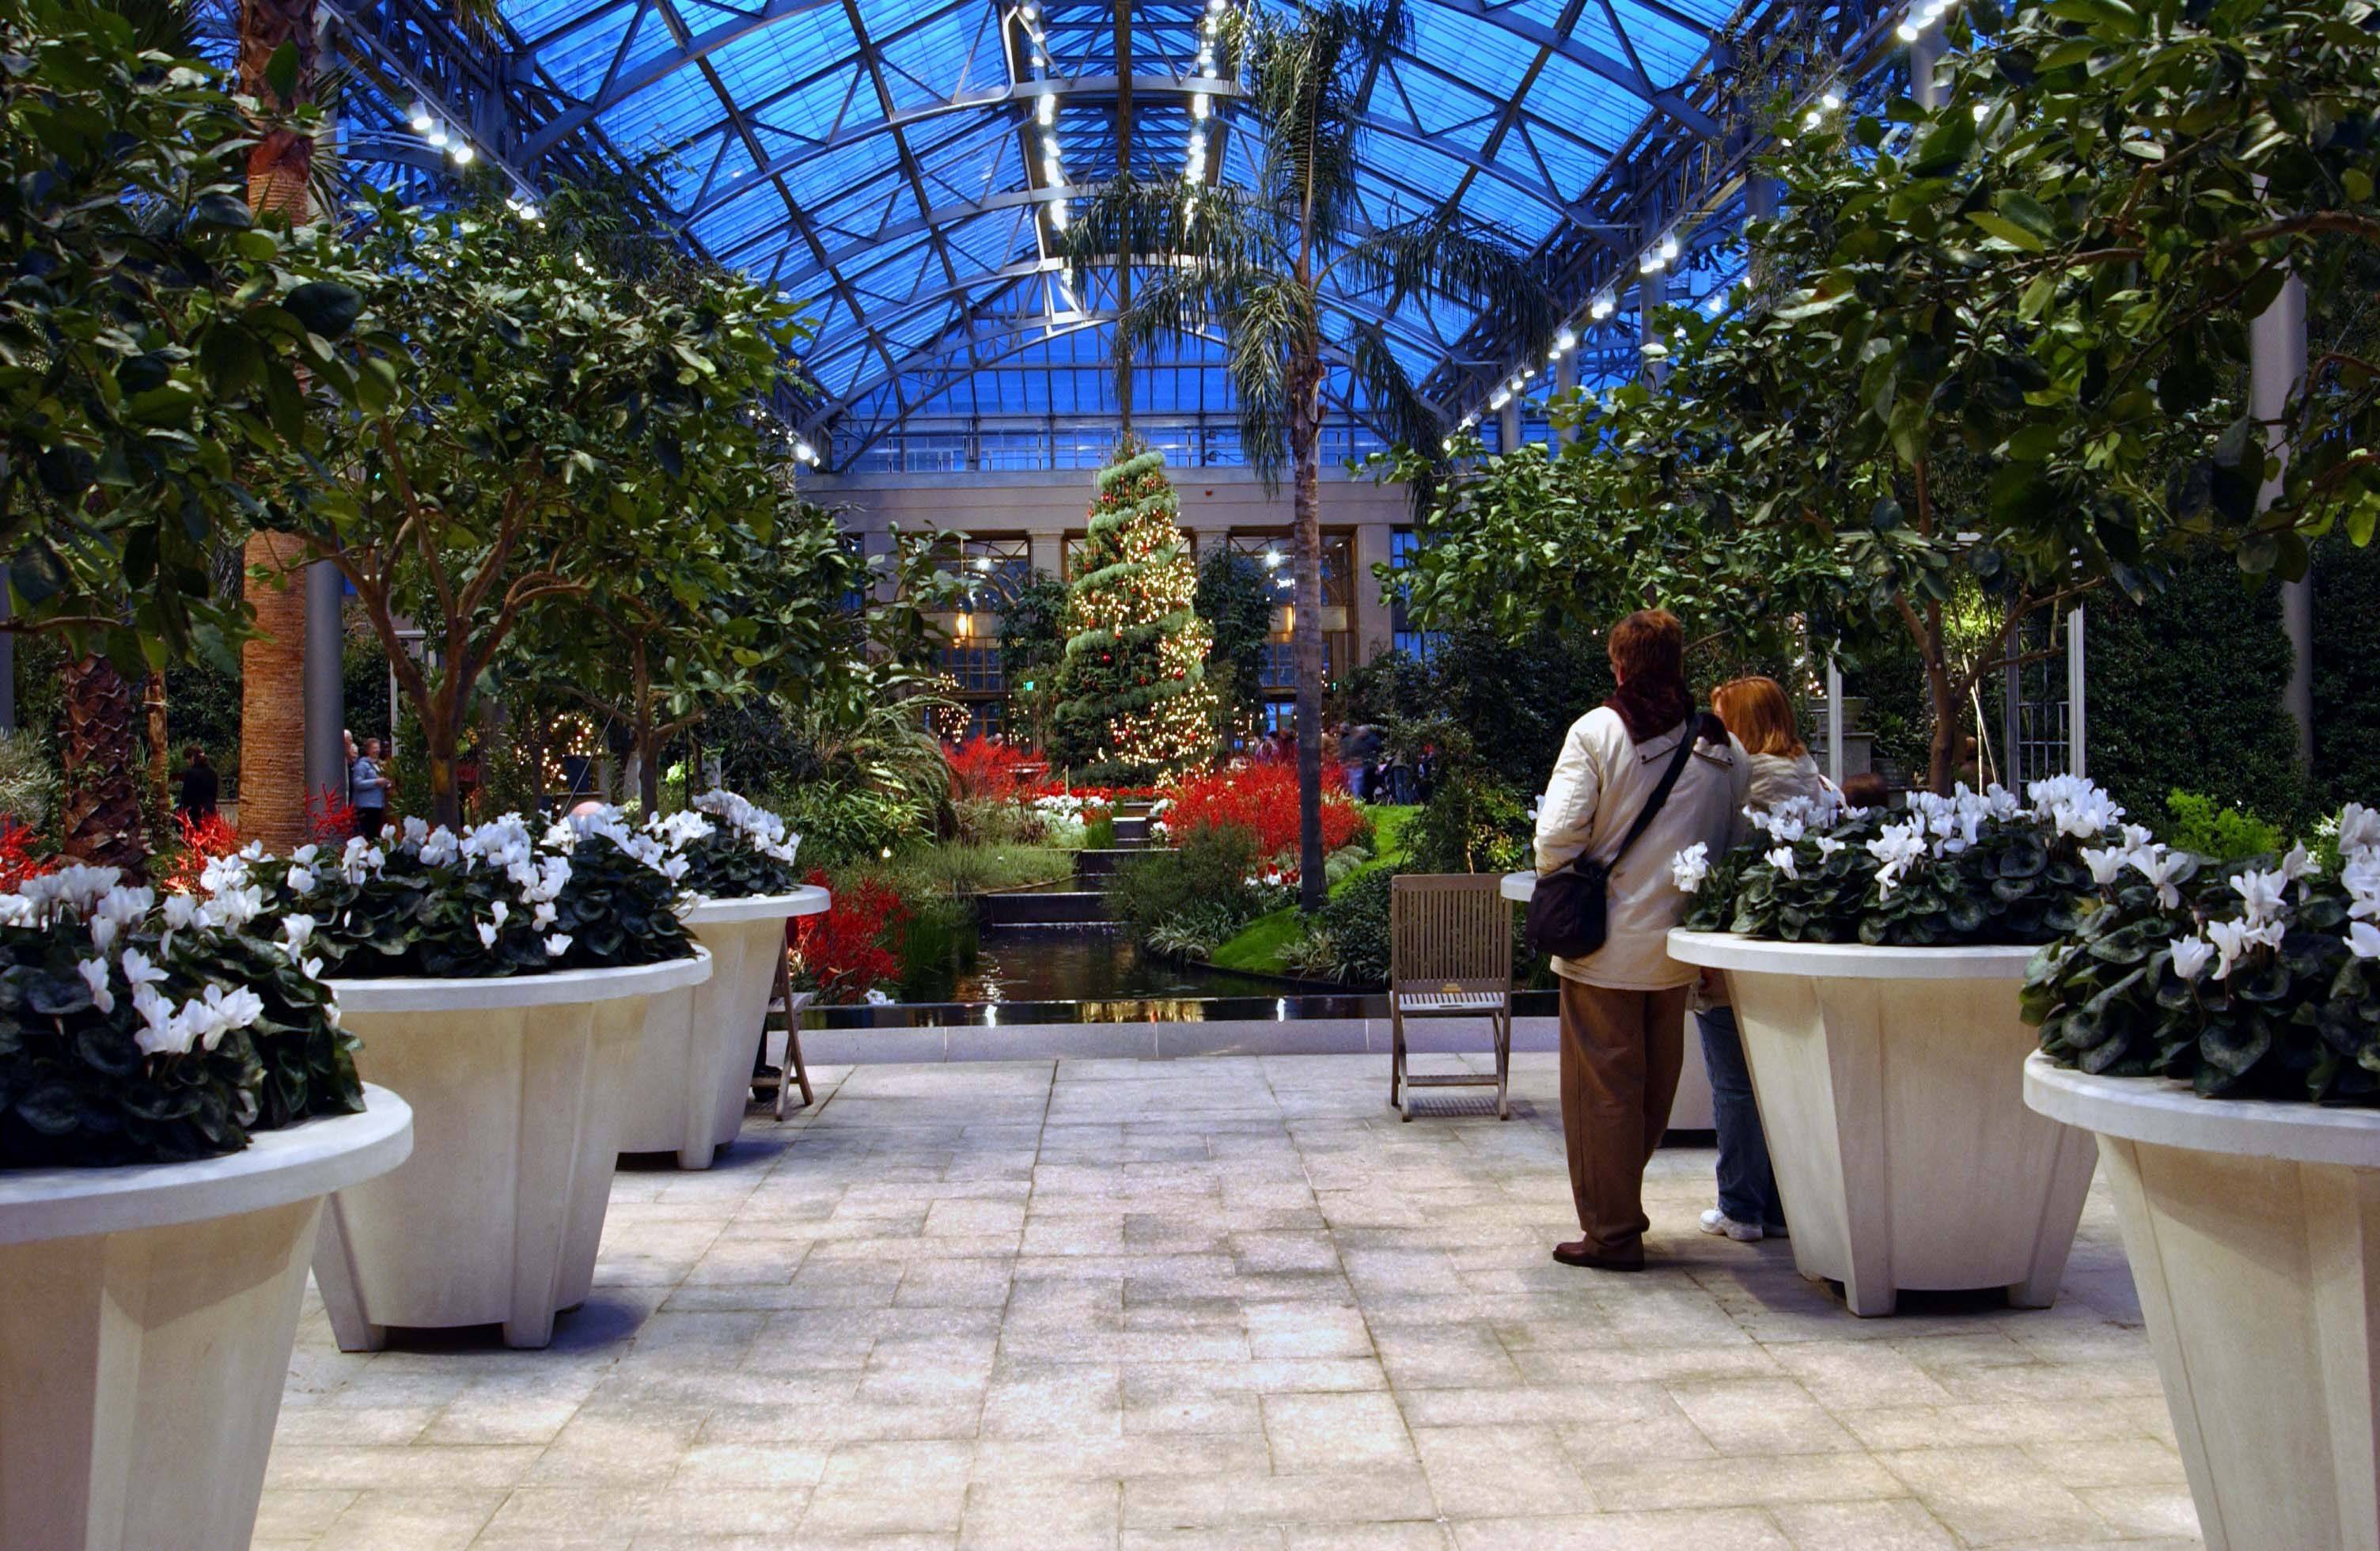 The Longwood Gardens Conservatory